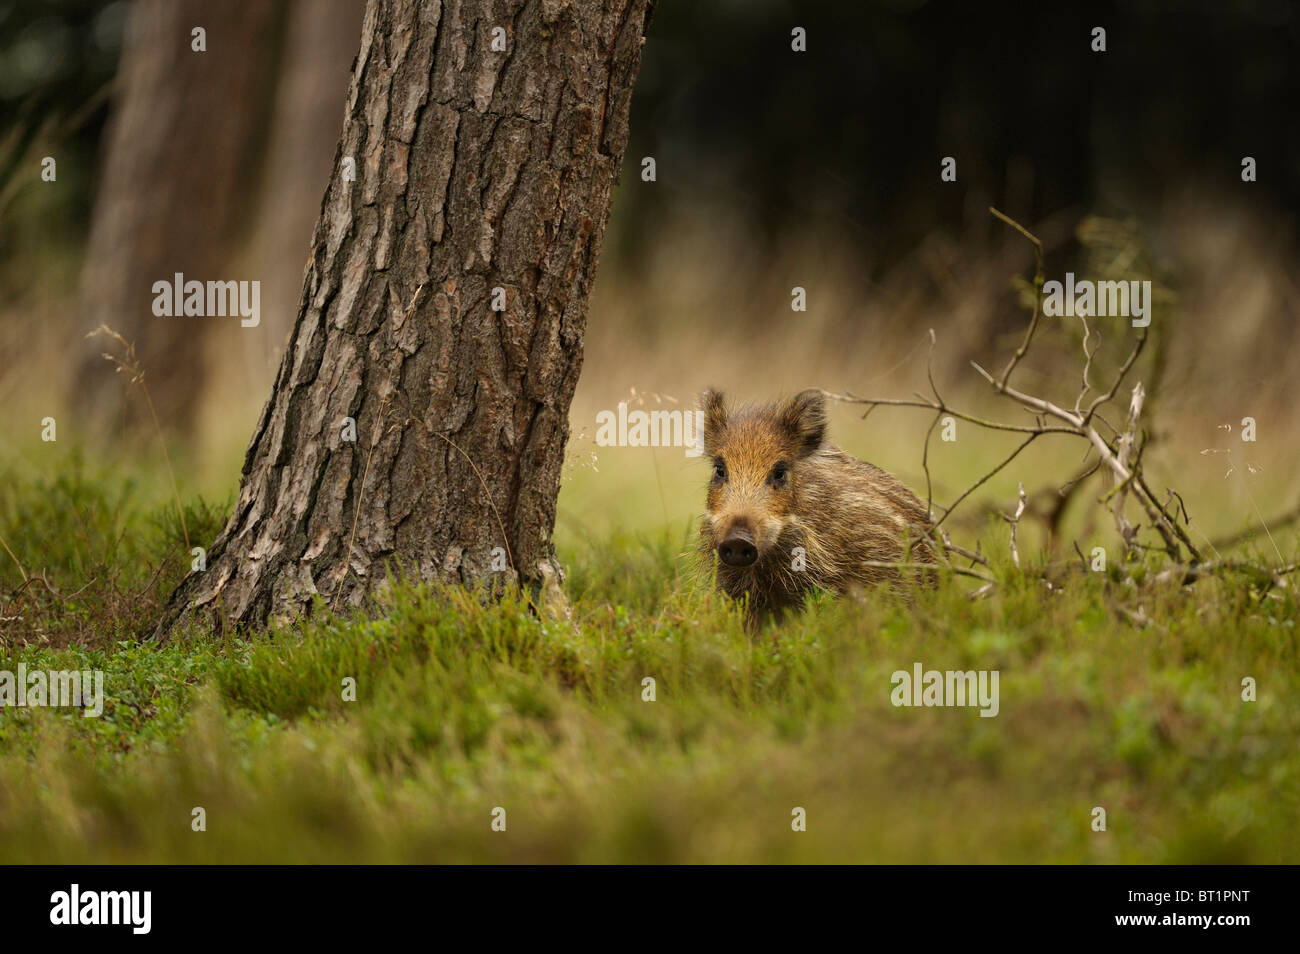 Wild Boar (Sus scrofa). Piglet foraging in pine forest, Netherlands. Stock Photo